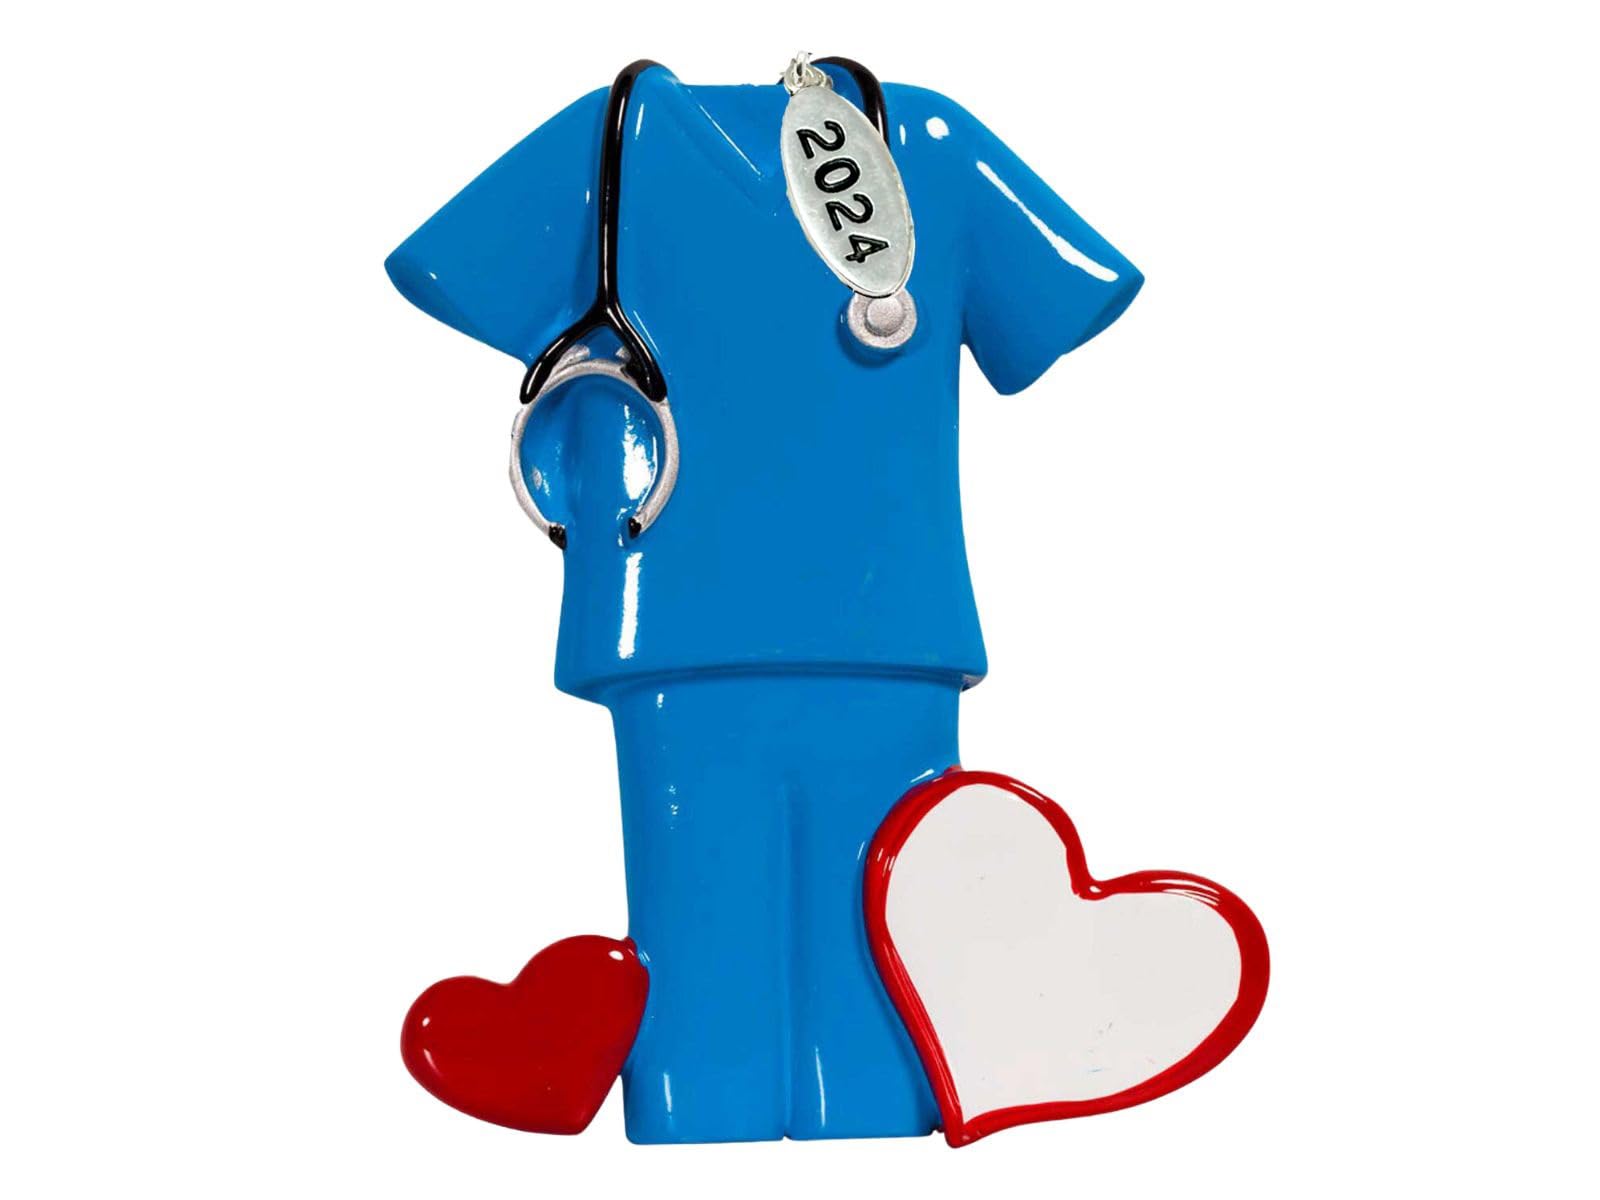 2024 Scrubs Nurse Ornament or Doctor Ornament - Can Be Personalized - Great for Medical Student Gifts, Doctor Gifts or Nurse Gifts - Comes in a Pretty Organza Gift Bag so its Ready for Giving